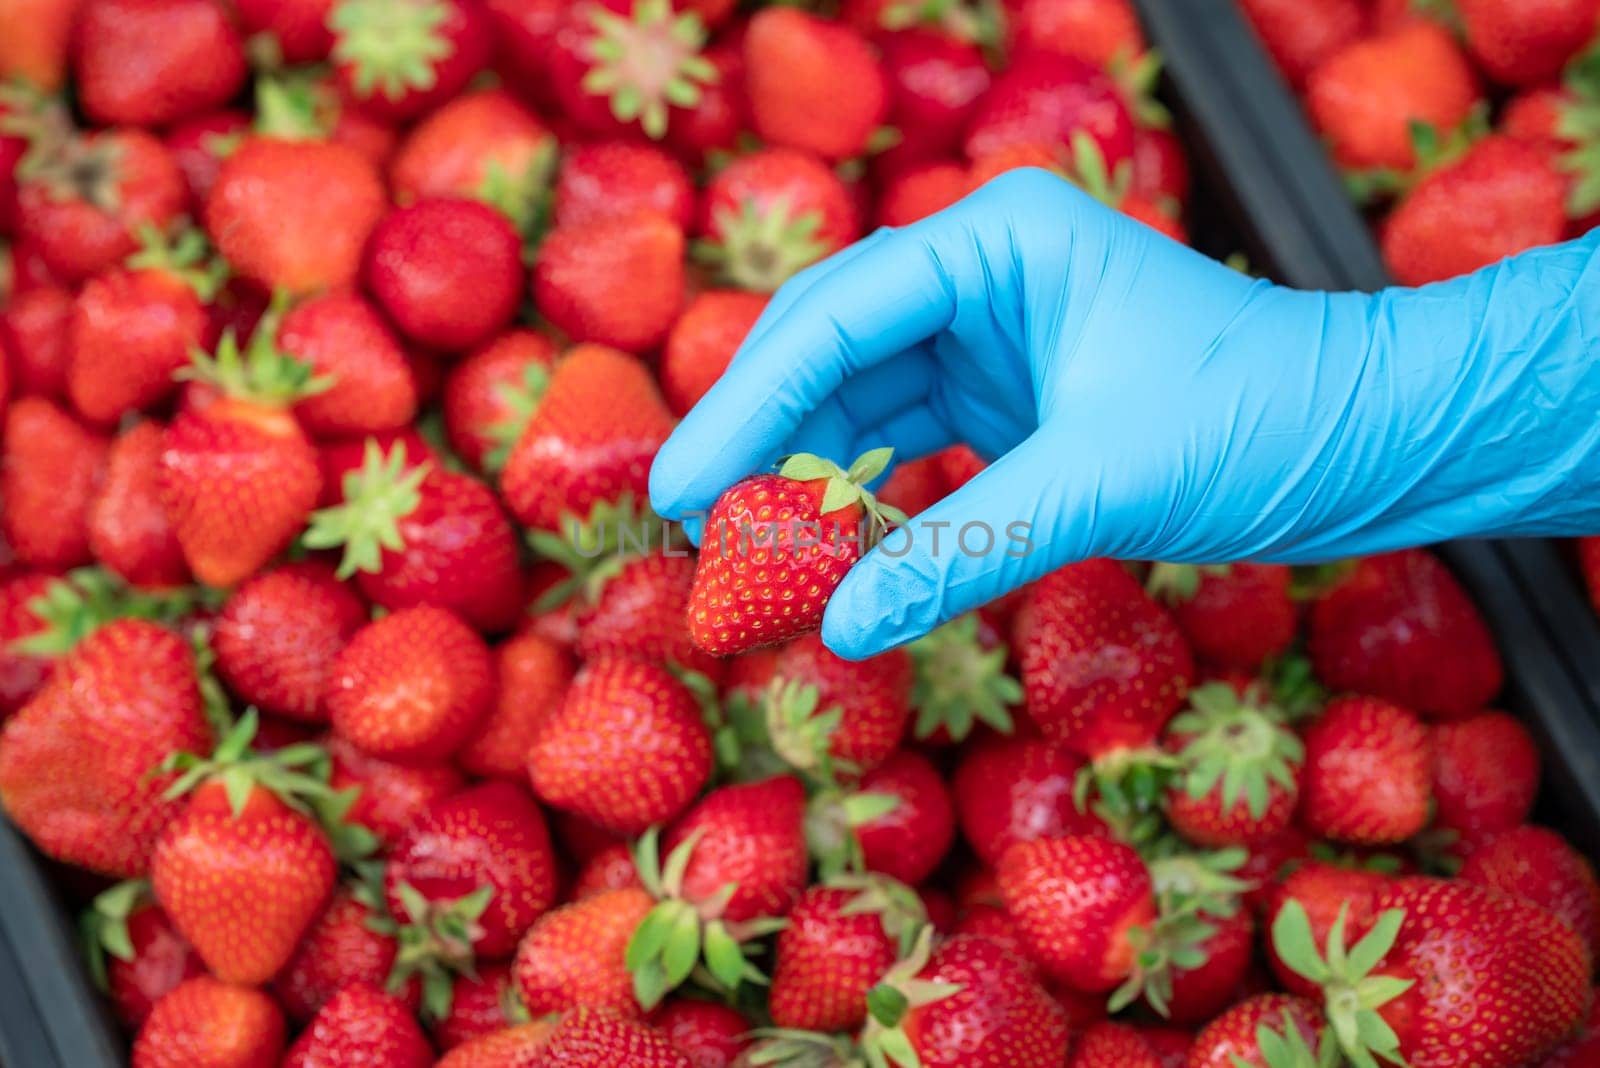 Hand in blue glove holding one ripe strawberry over many in plastic boxes by VitaliiPetrushenko